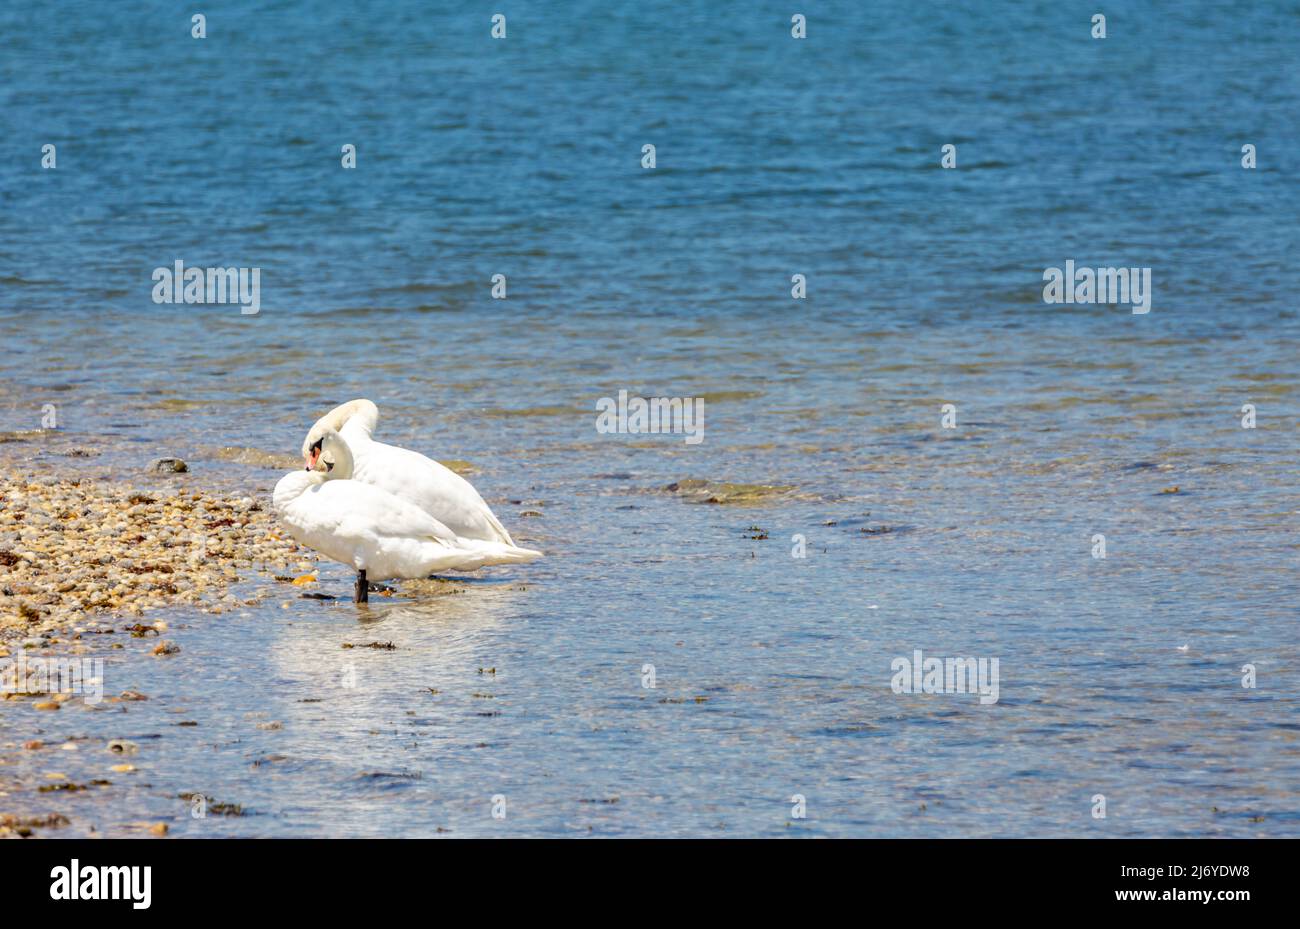 Pair of swans standing in shallow water Stock Photo